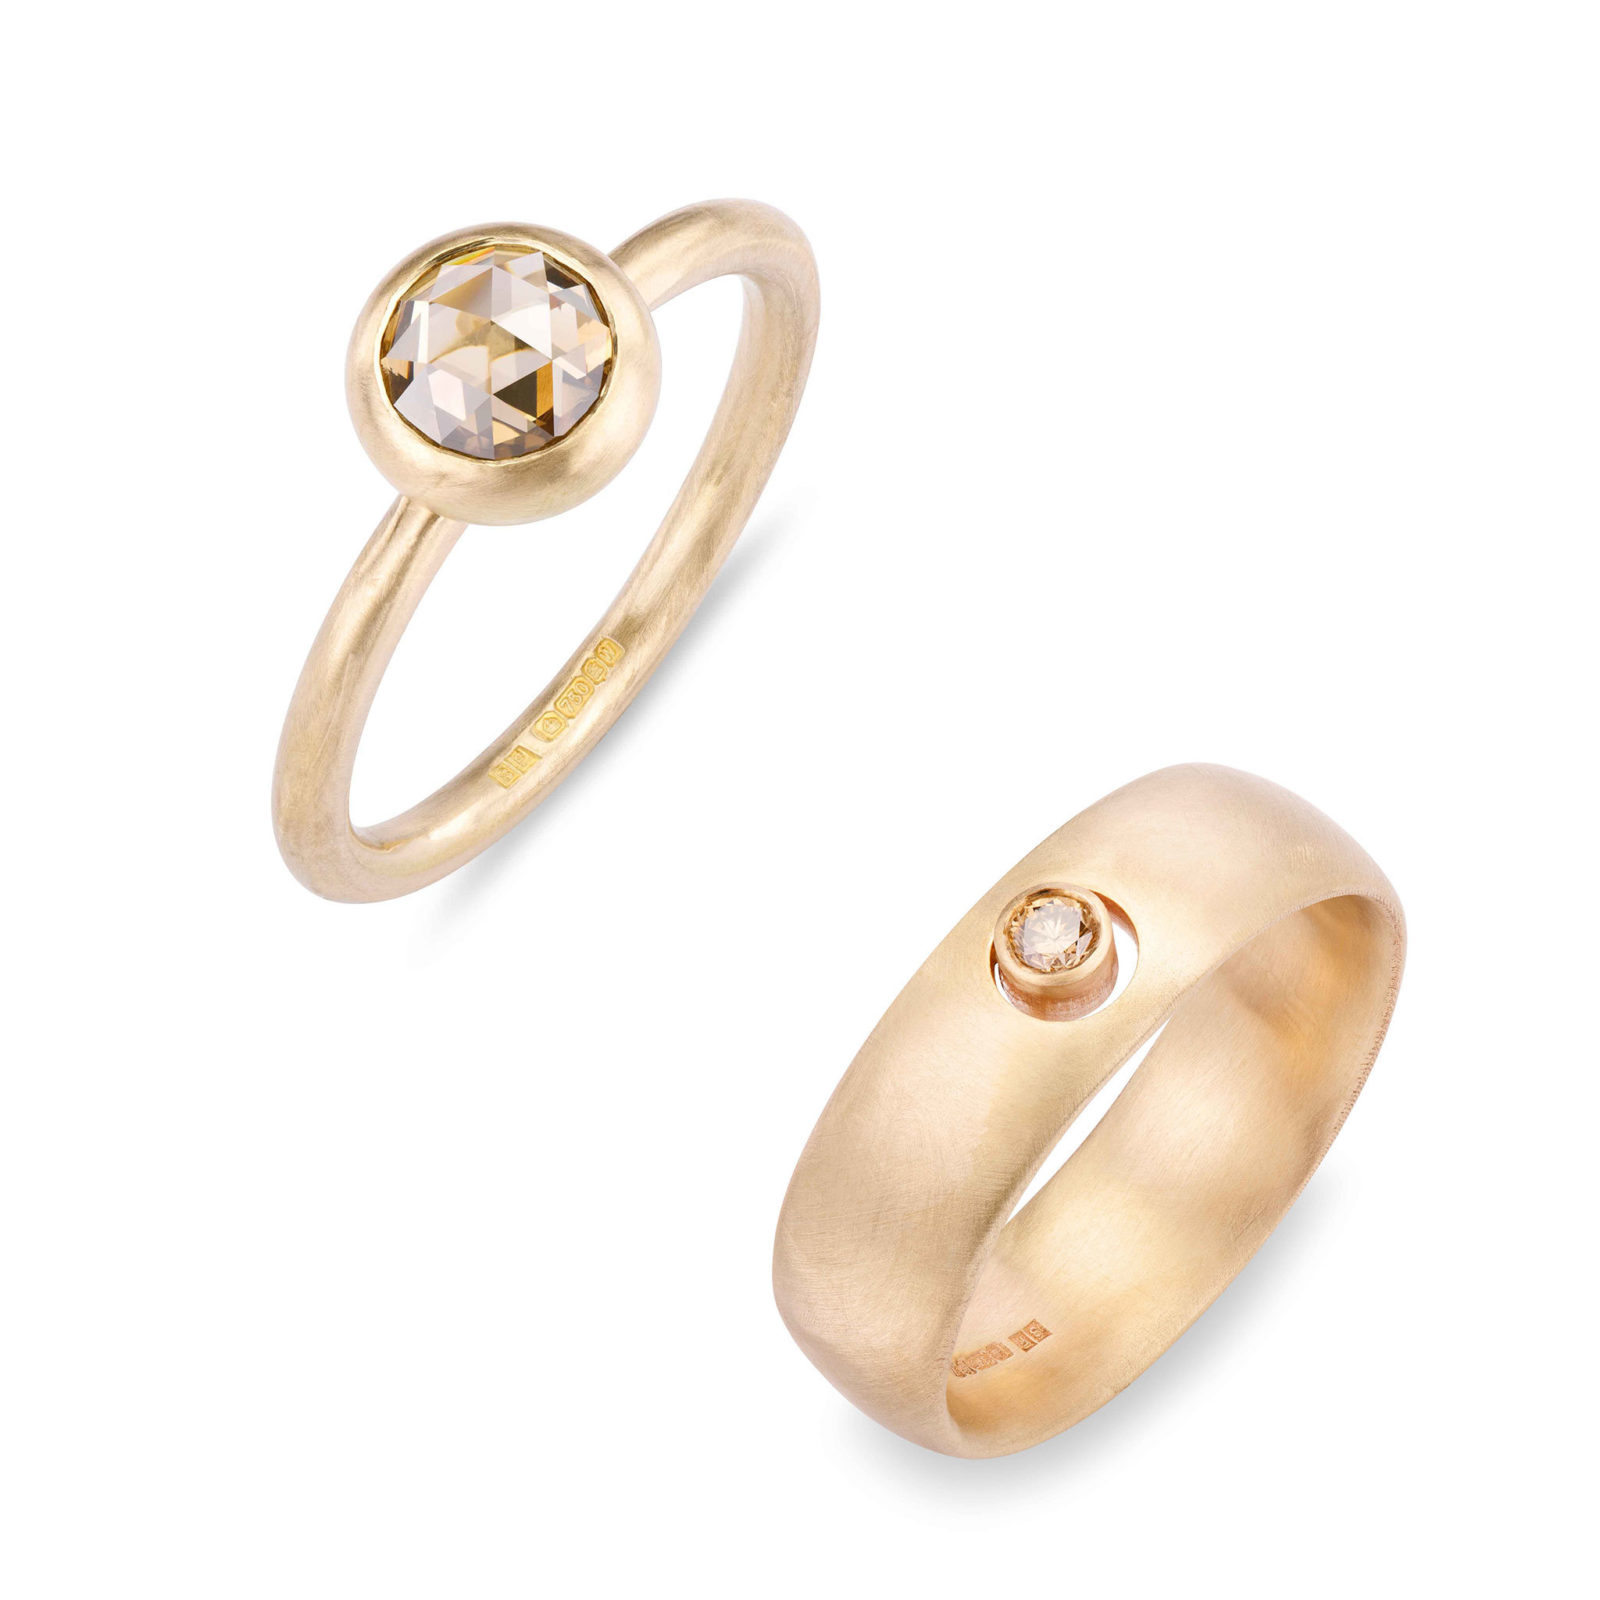 Indulge in Exclusivity: Exclusive Gold Rings